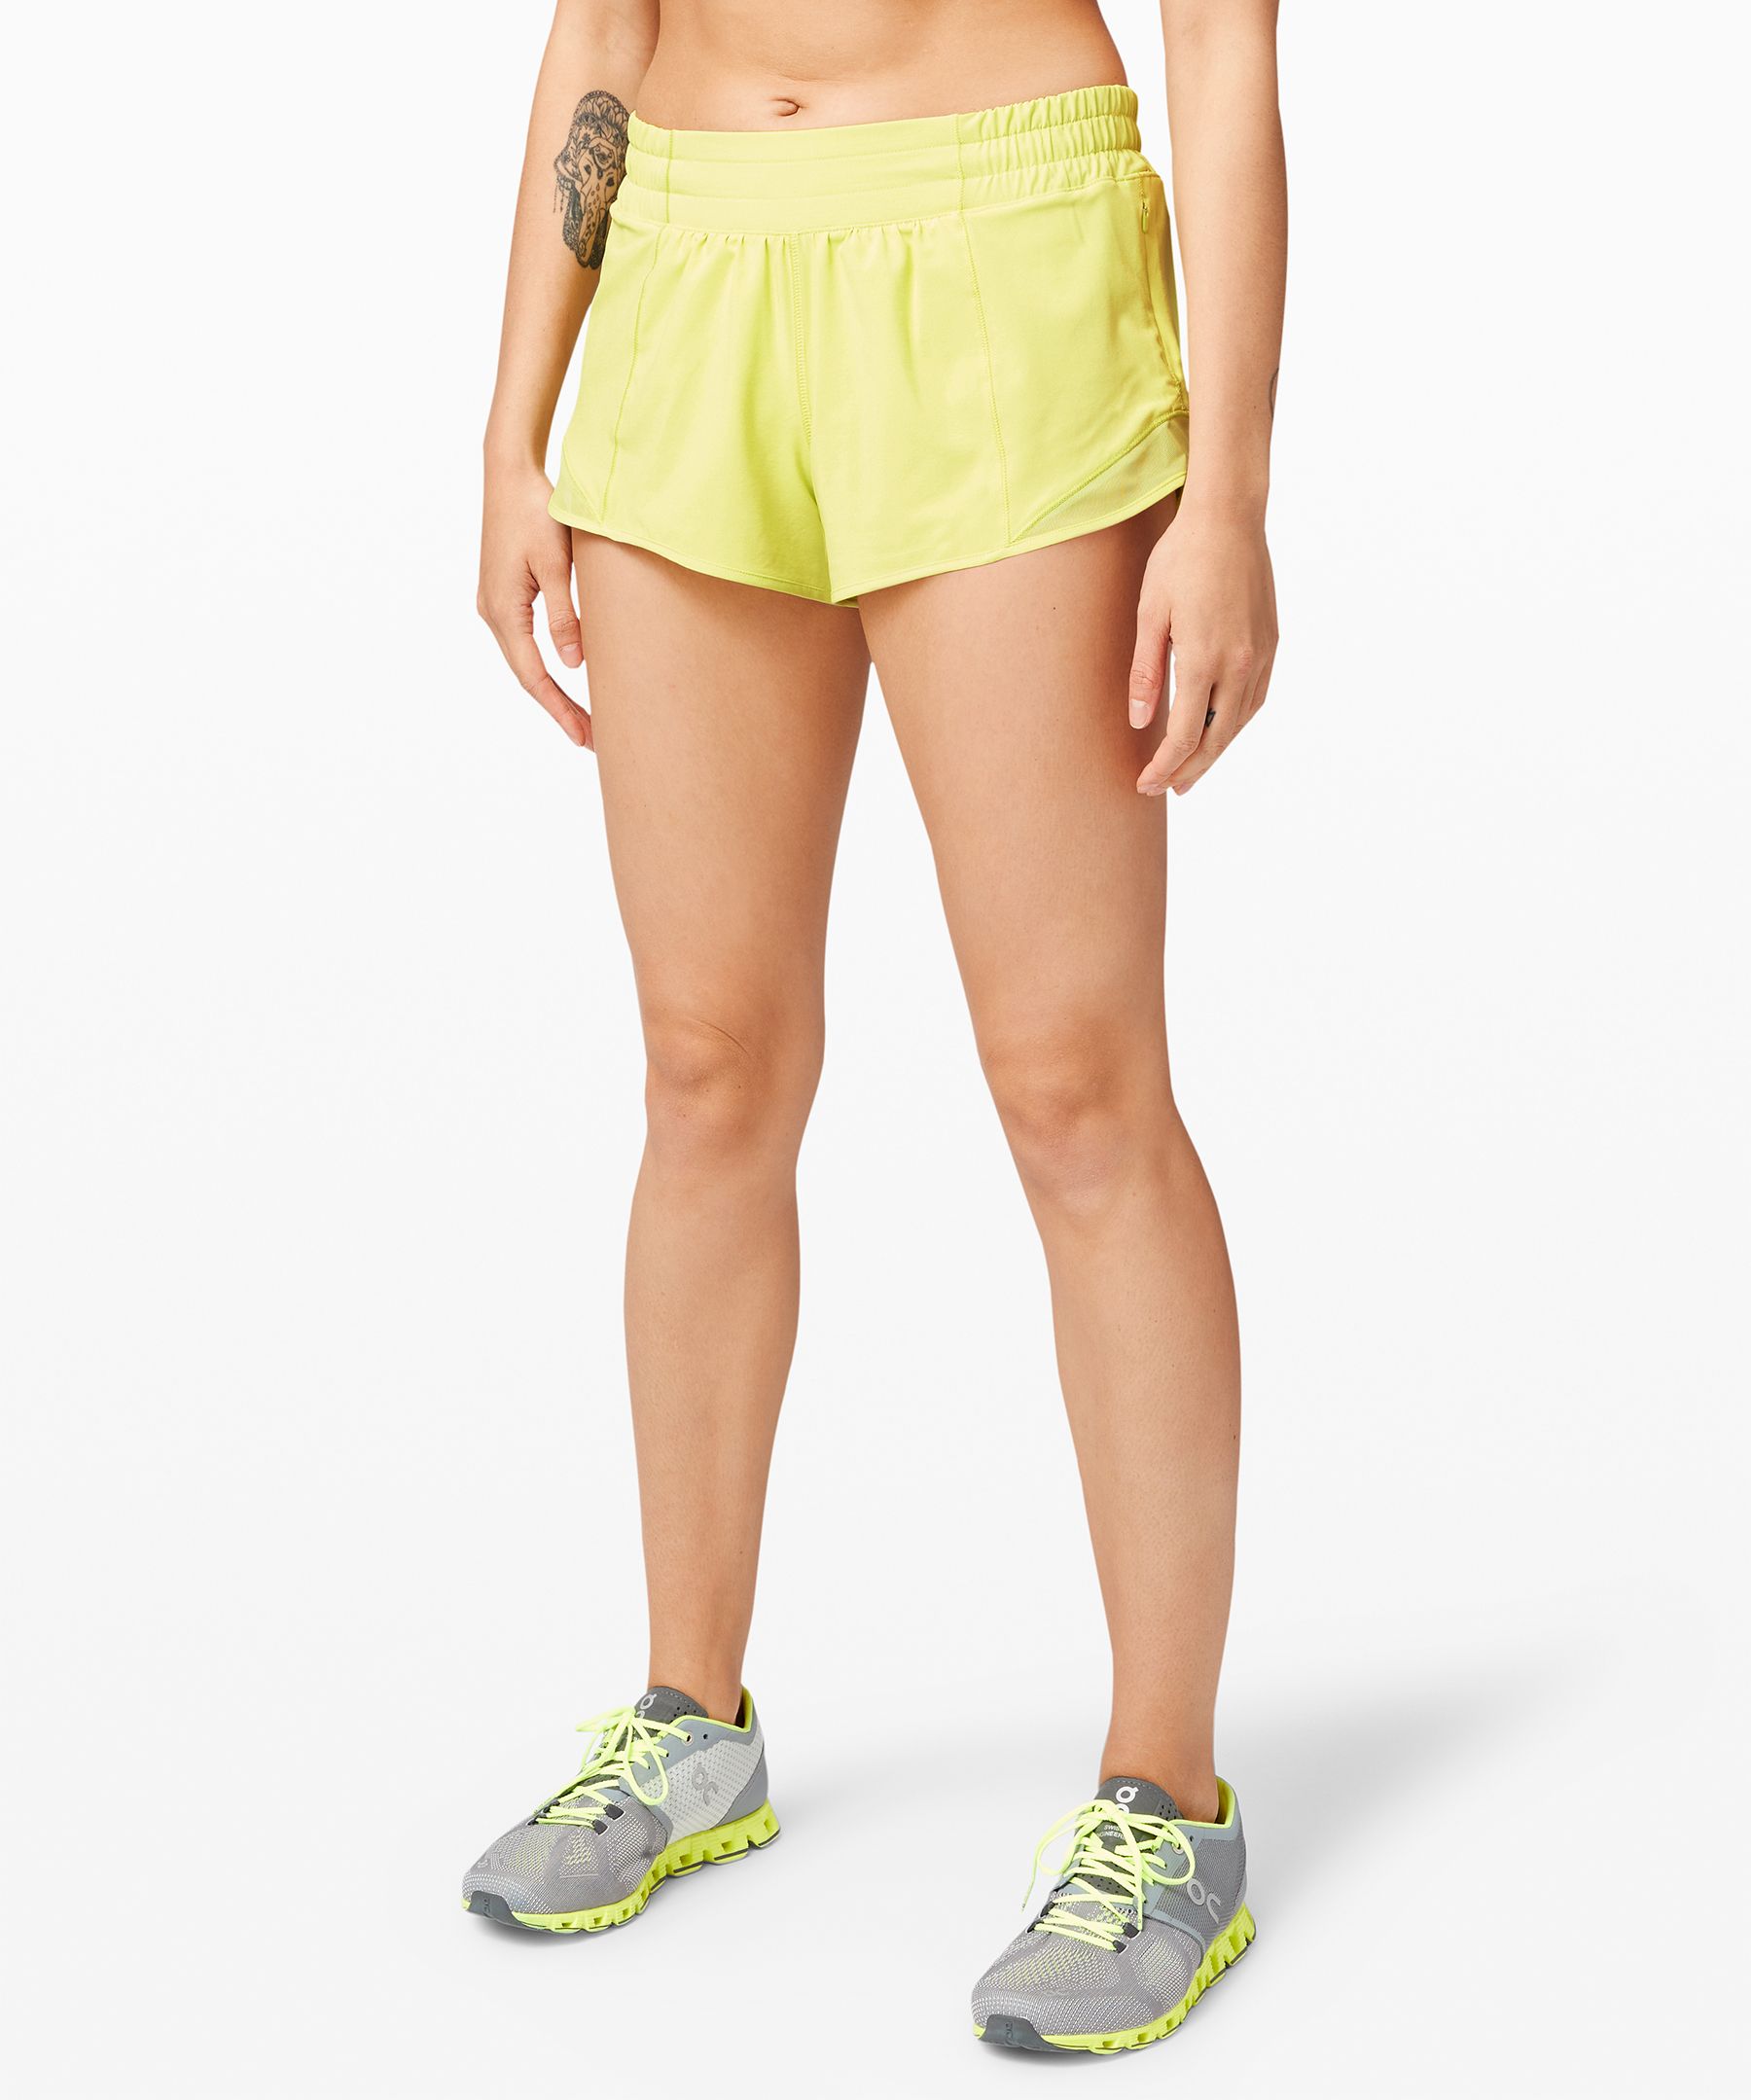 Lululemon Hotty Hot Low Rise Short 2.5" In Yellow